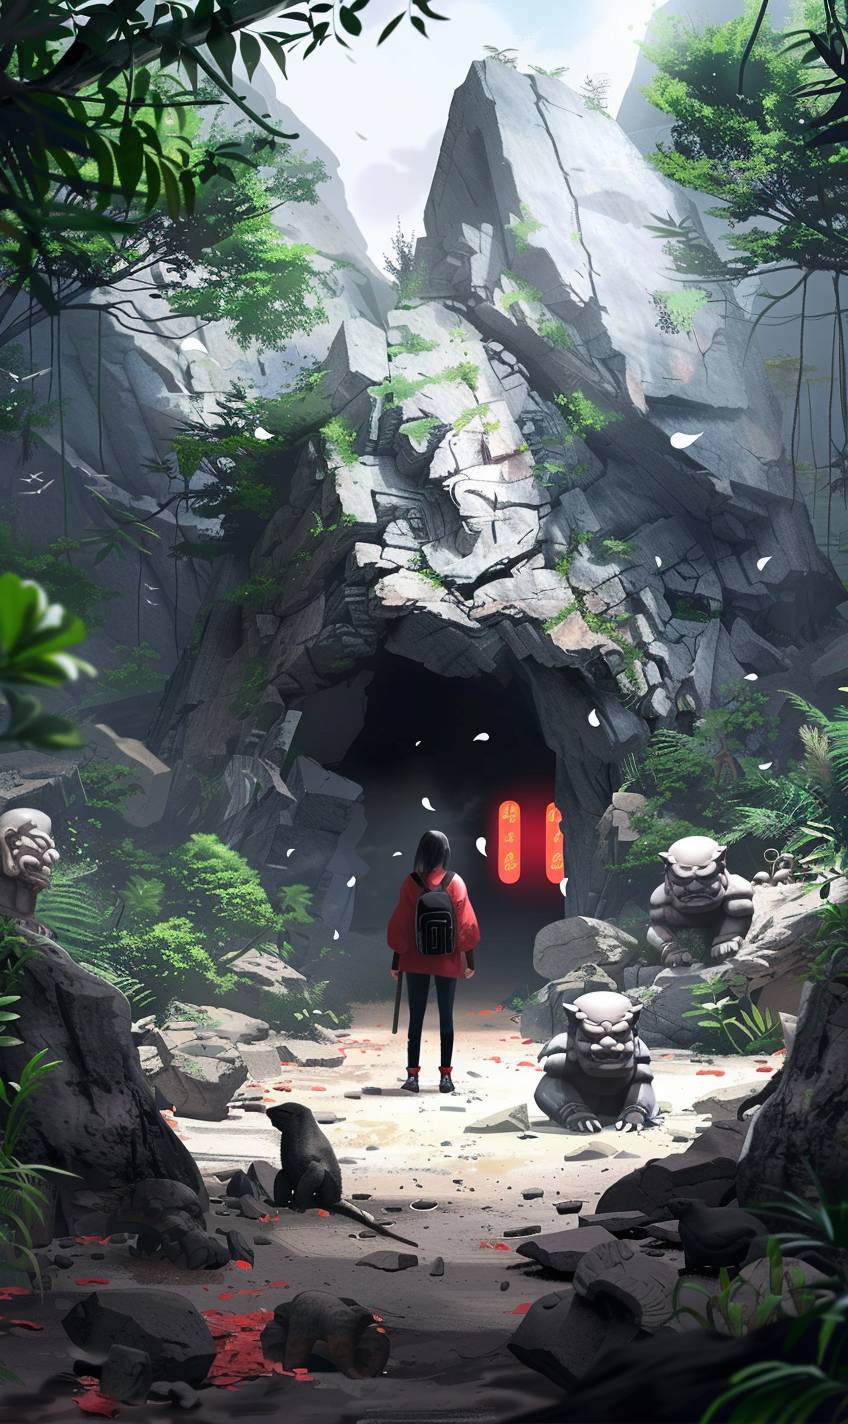 A mysterious explorer discovering an ancient, hidden temple deep in a dense jungle, with glowing runes and mythical creatures guarding the entrance